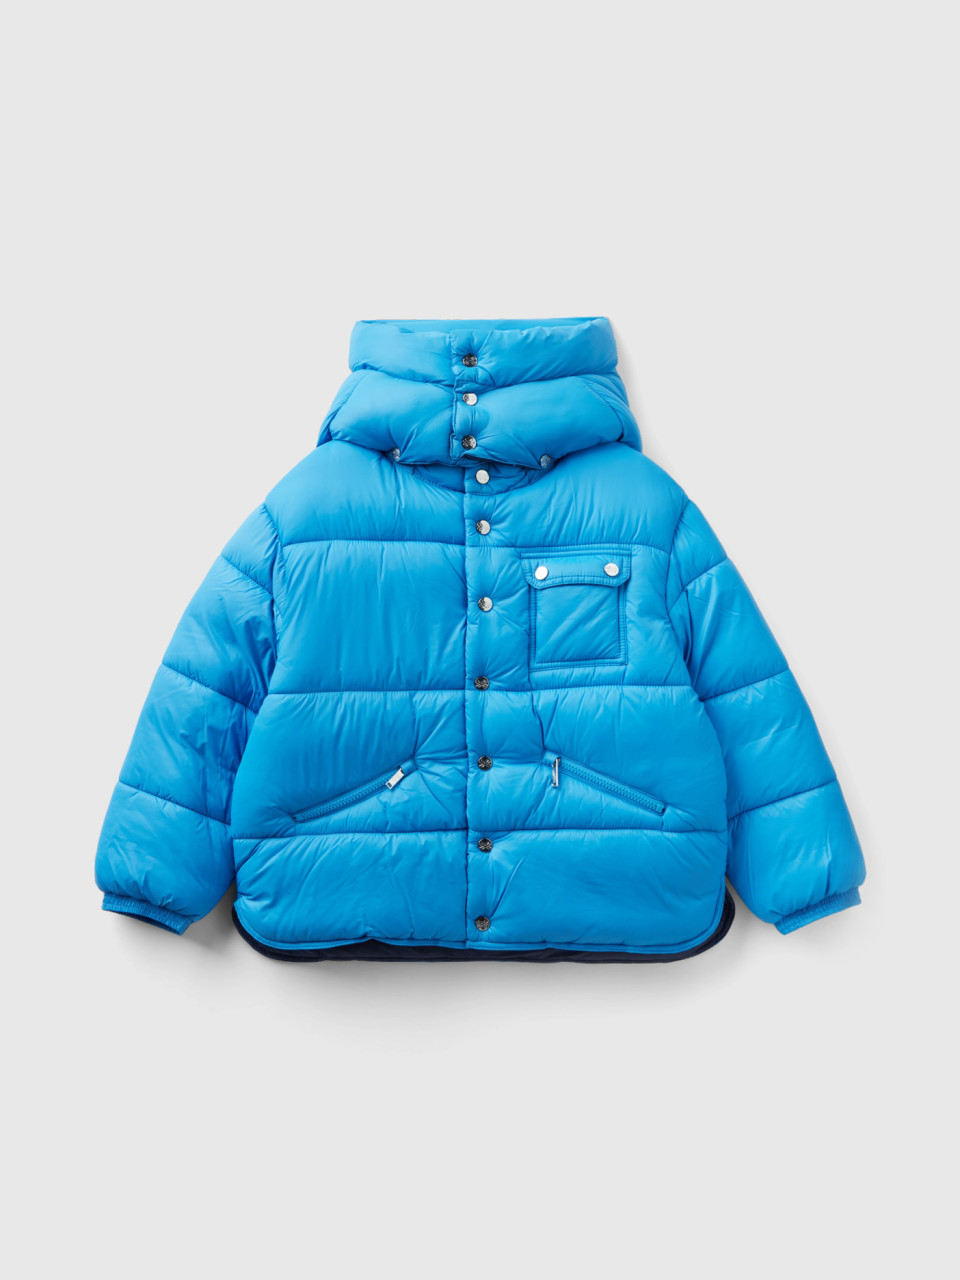 Benetton, Padded Jacket With Removable Hood, Light Blue, Kids